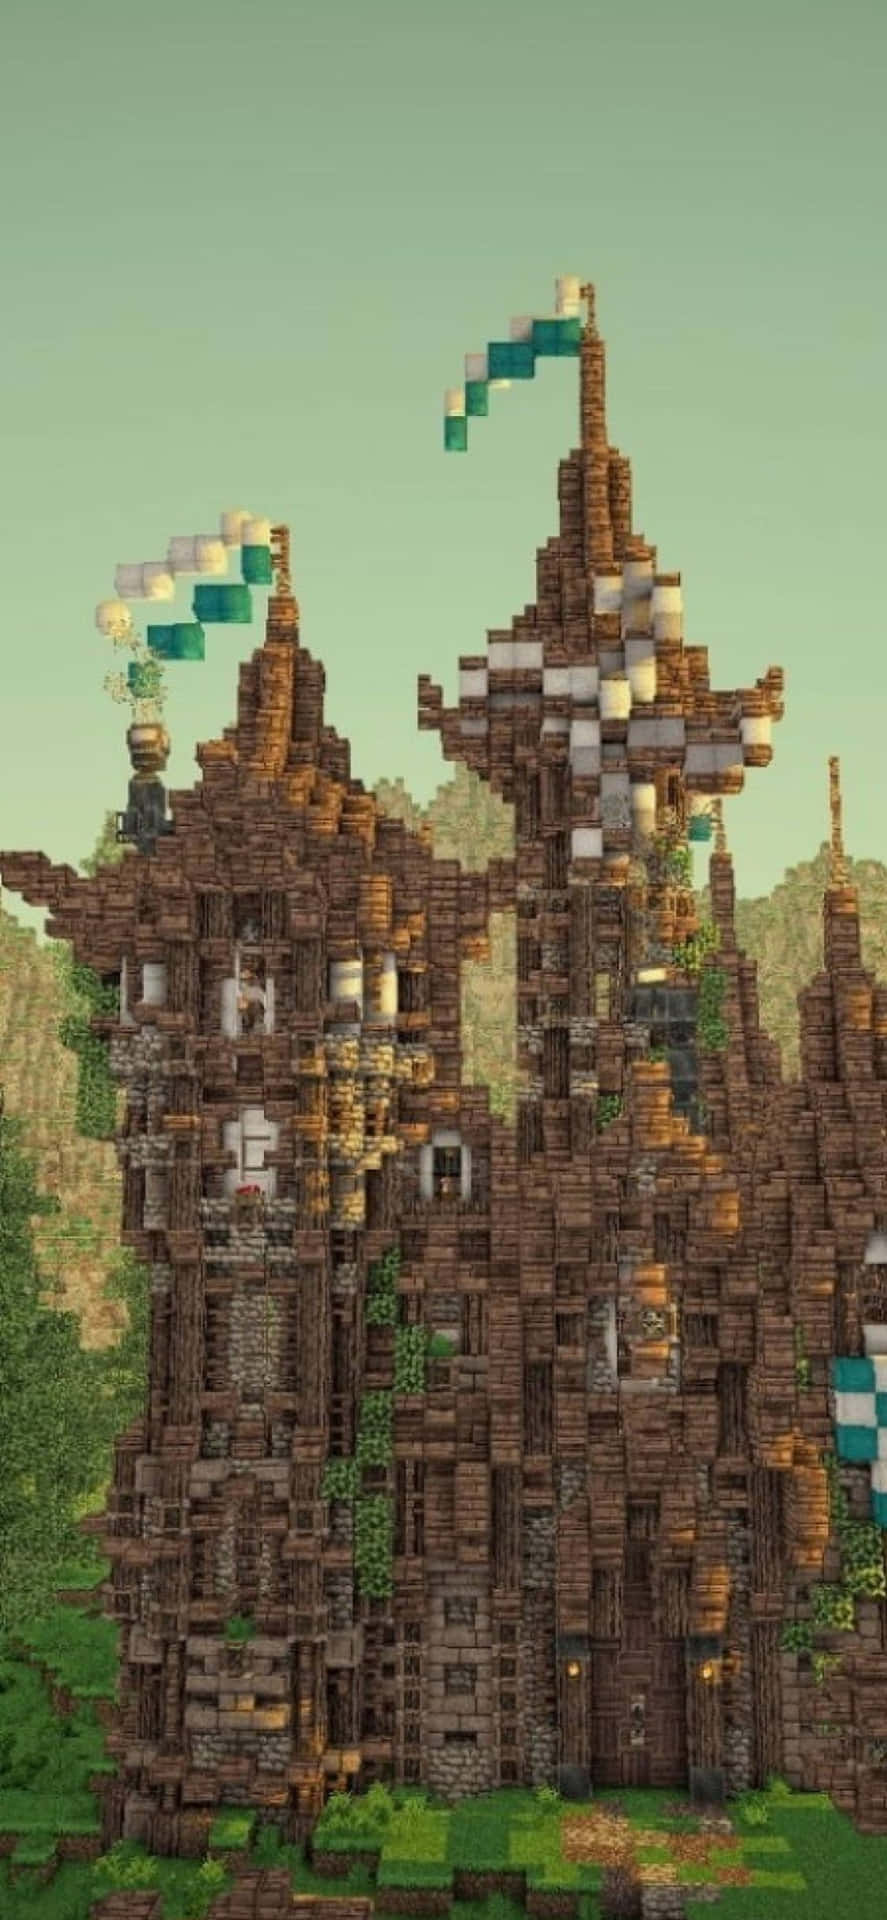 Explore new worlds with Minecraft on the Iphone Xs